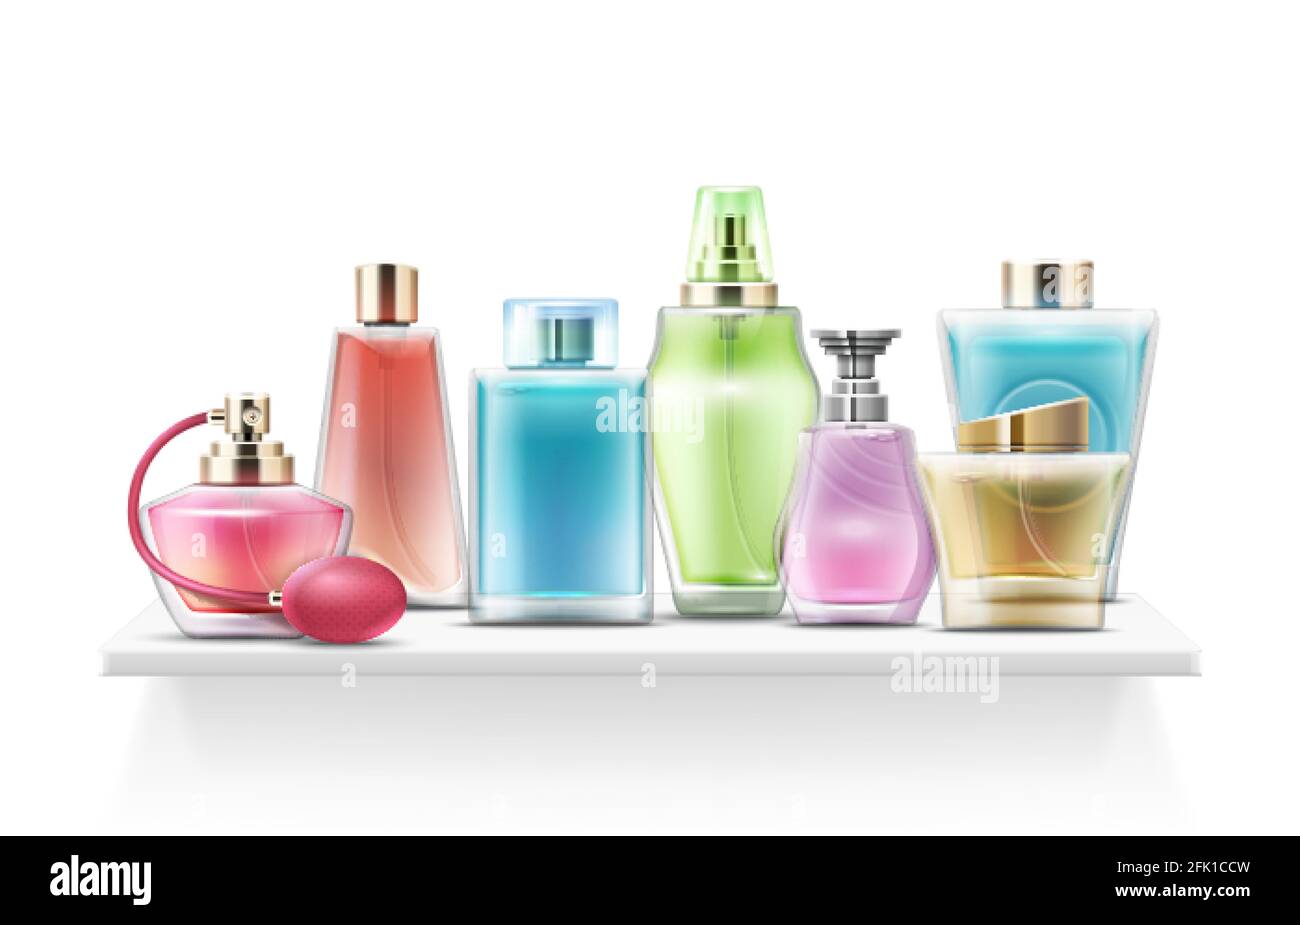 Free Vector  Perfume glass bottles colorful realistic